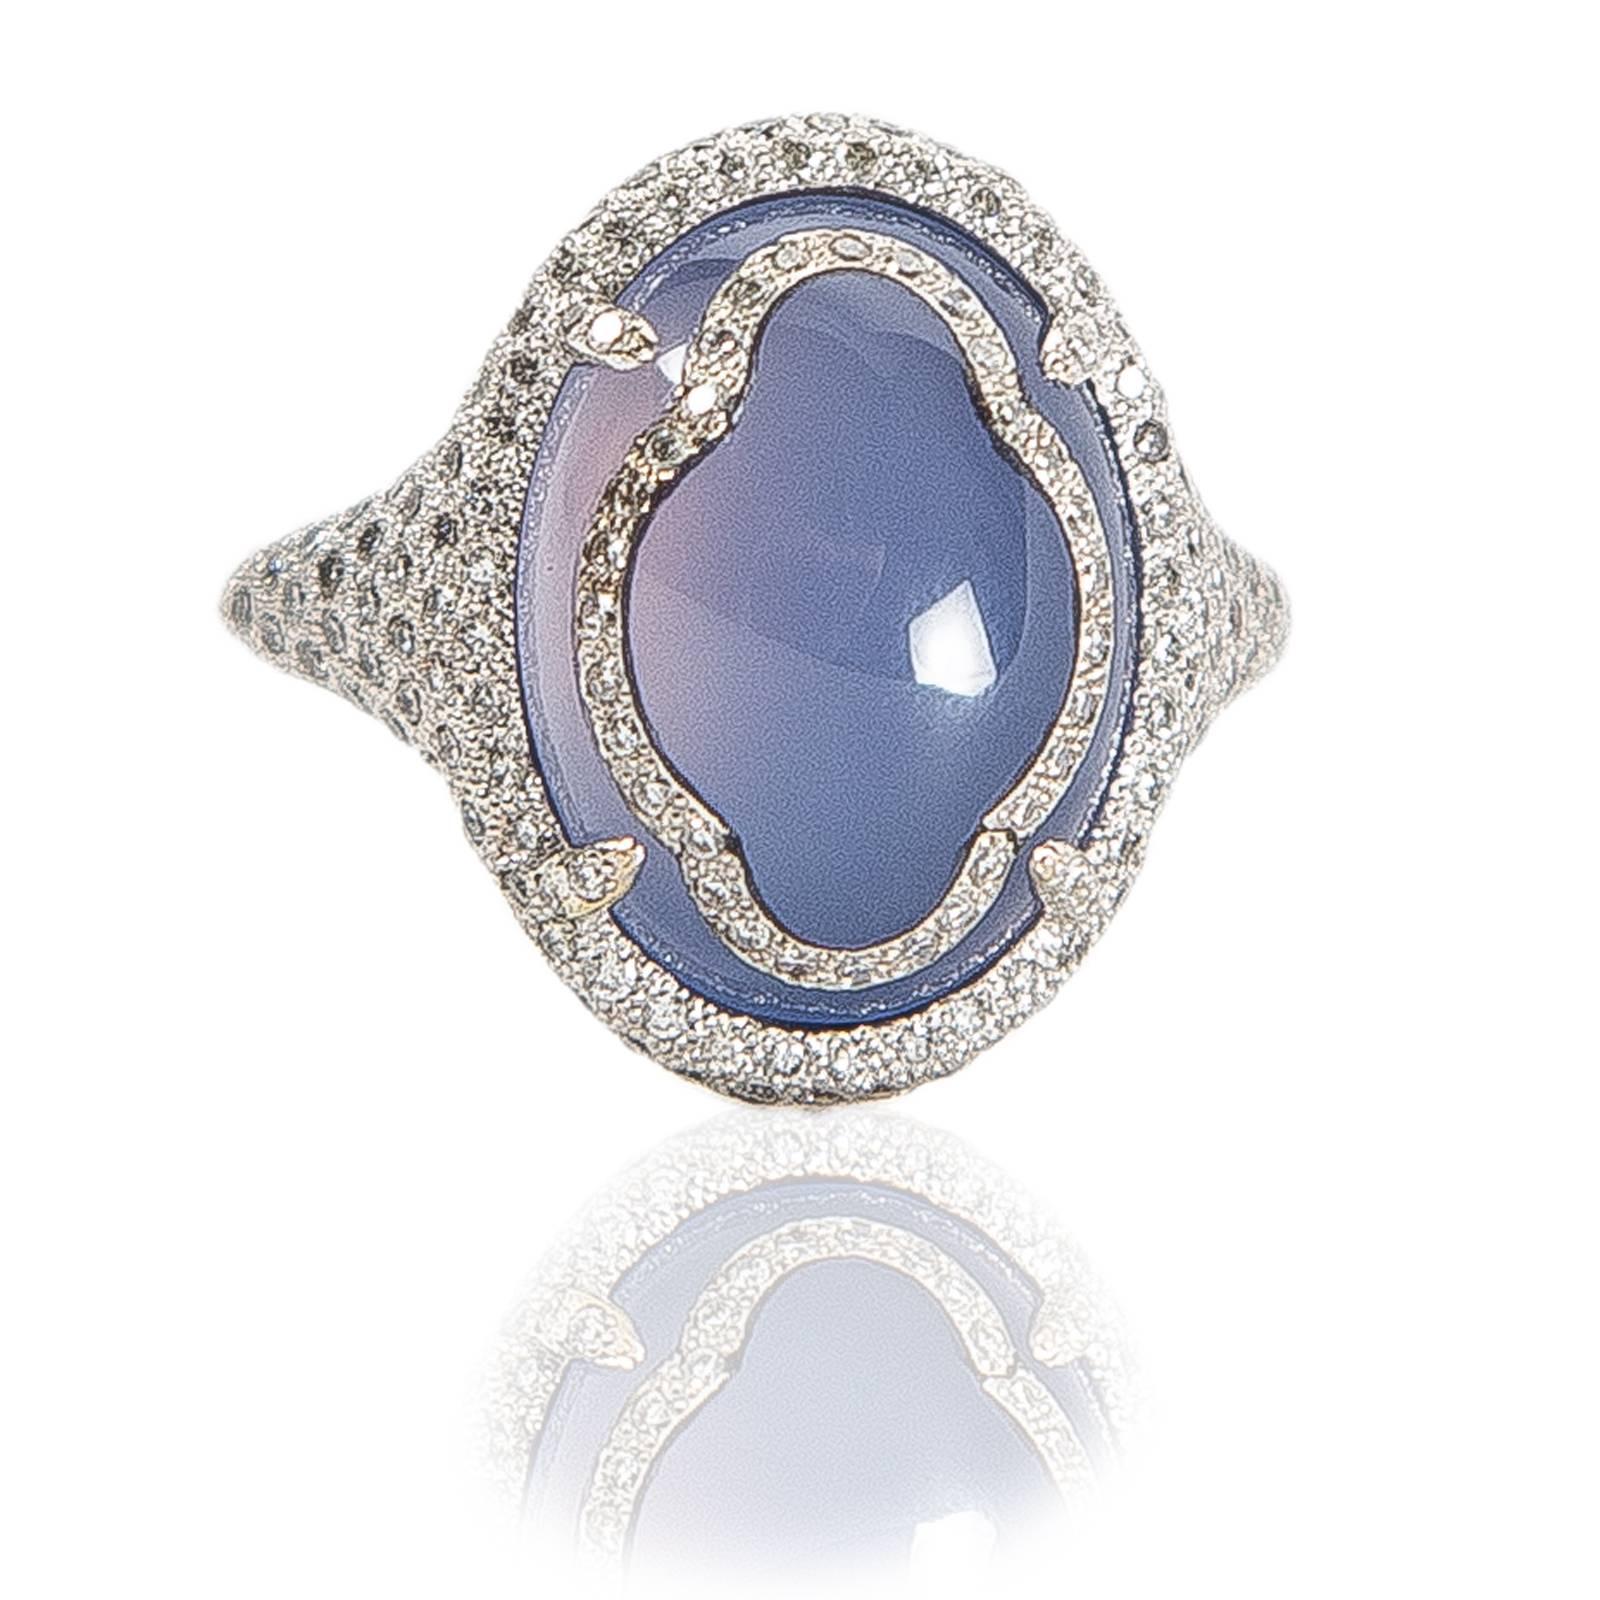 18kt. white gold ring with chalcedony and white diamonds ct. 0,81

Handmade in Italy

Made-to-order production time: 5 weeks approx.